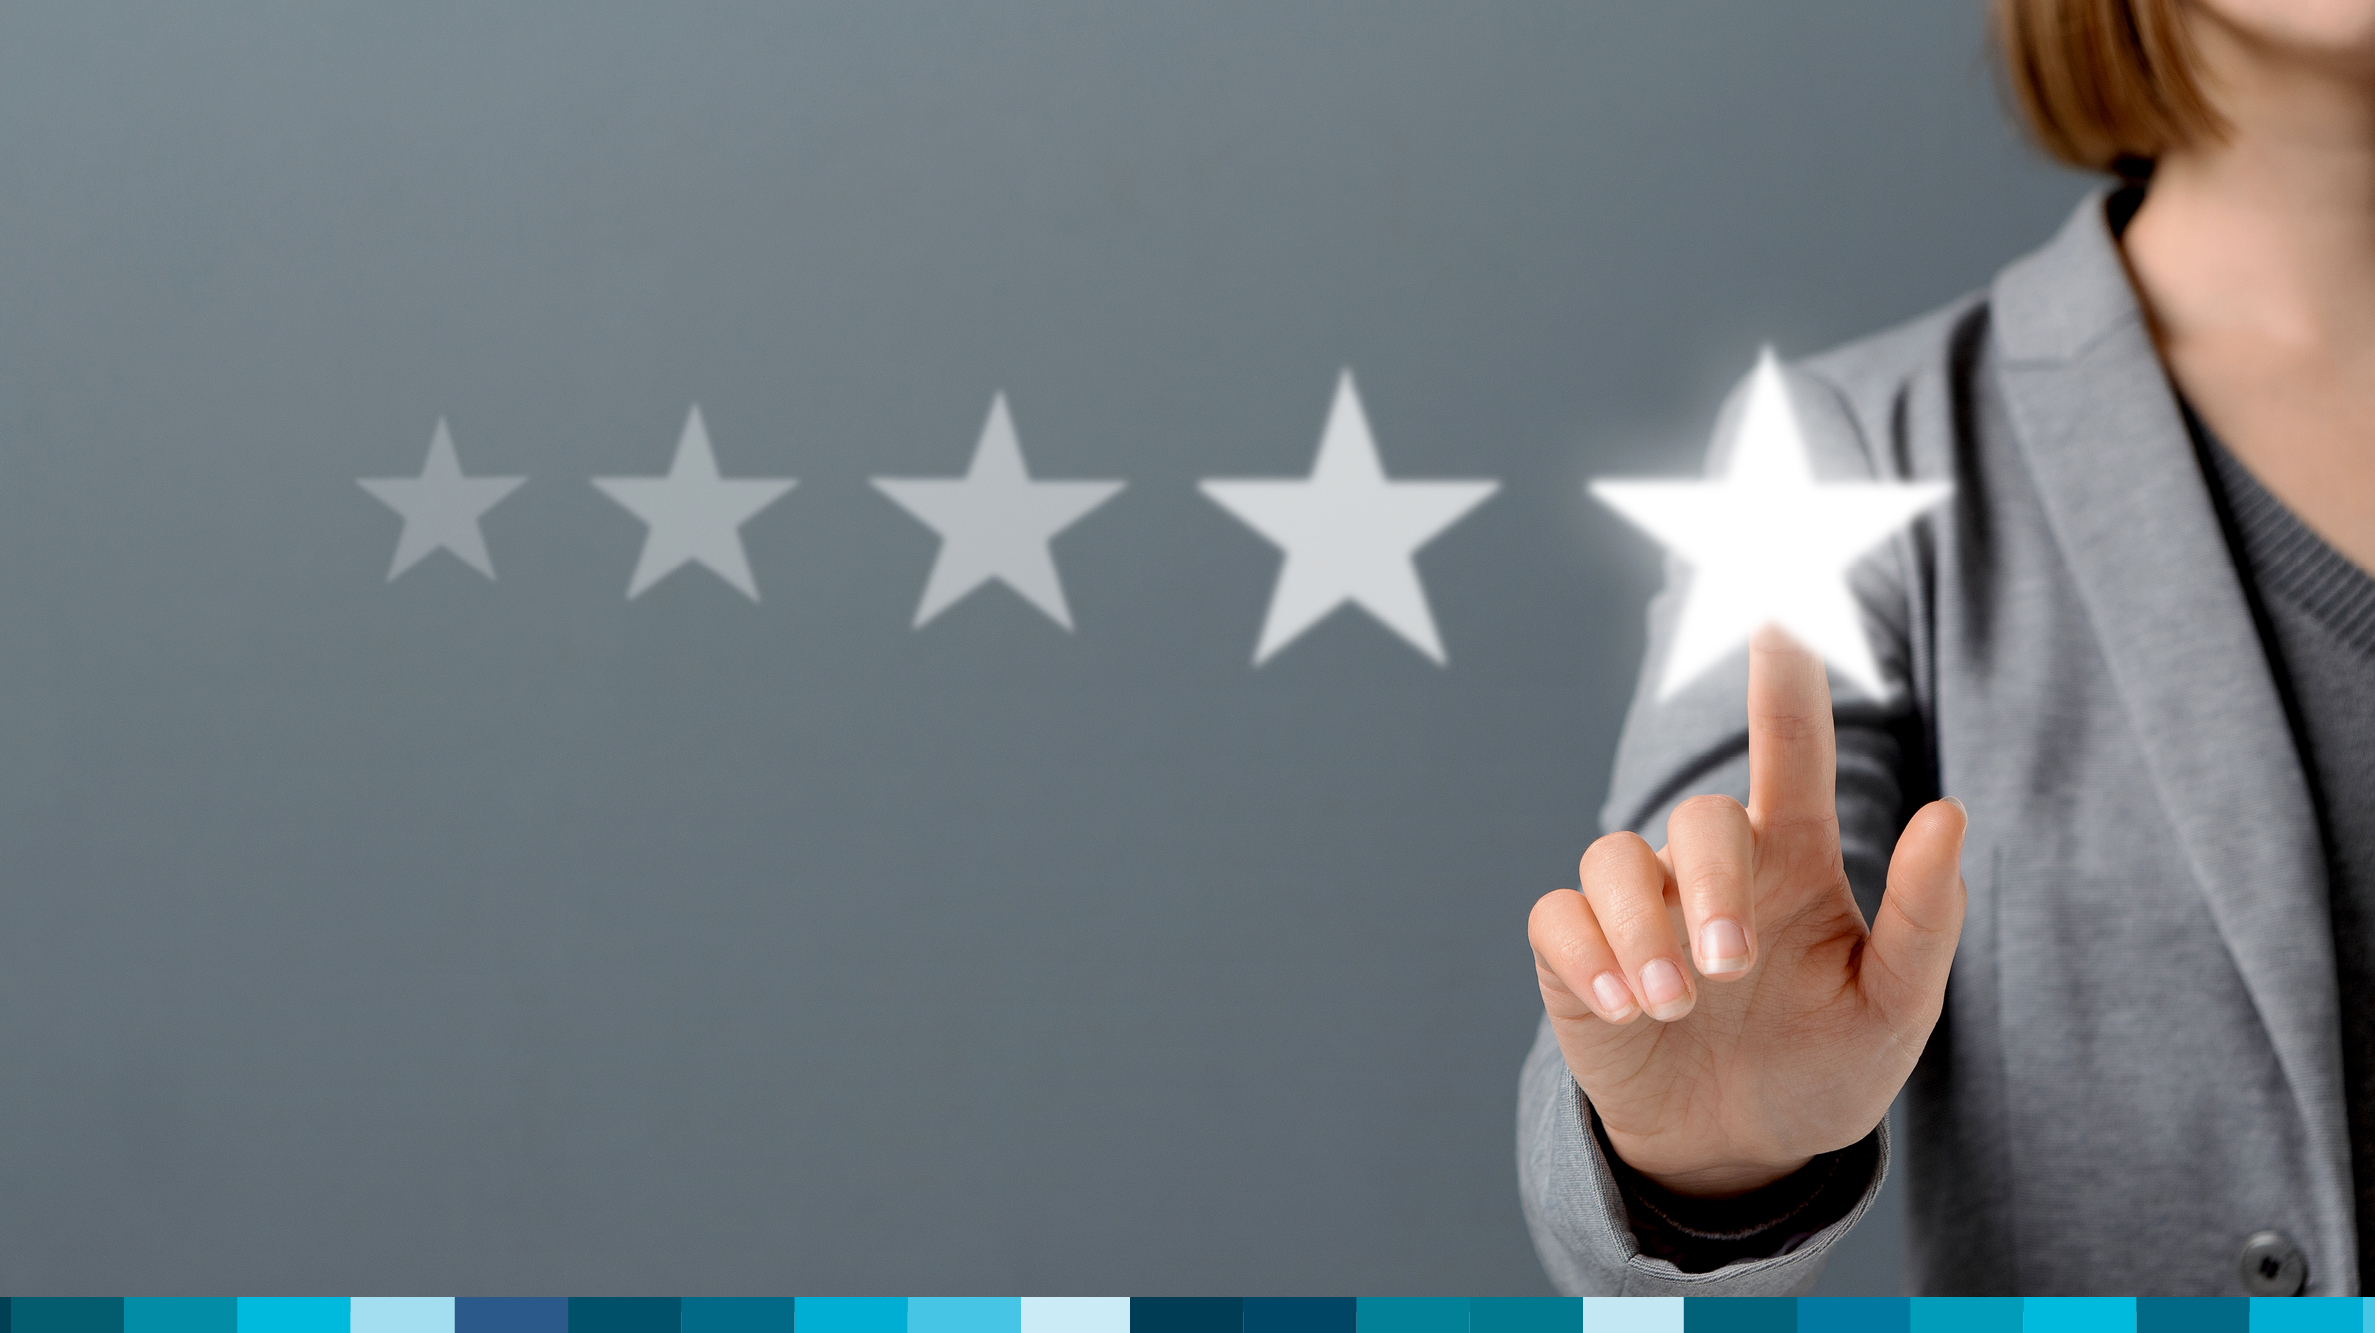 Getting a five-star rating for a customer service team means hiring five-star employees.